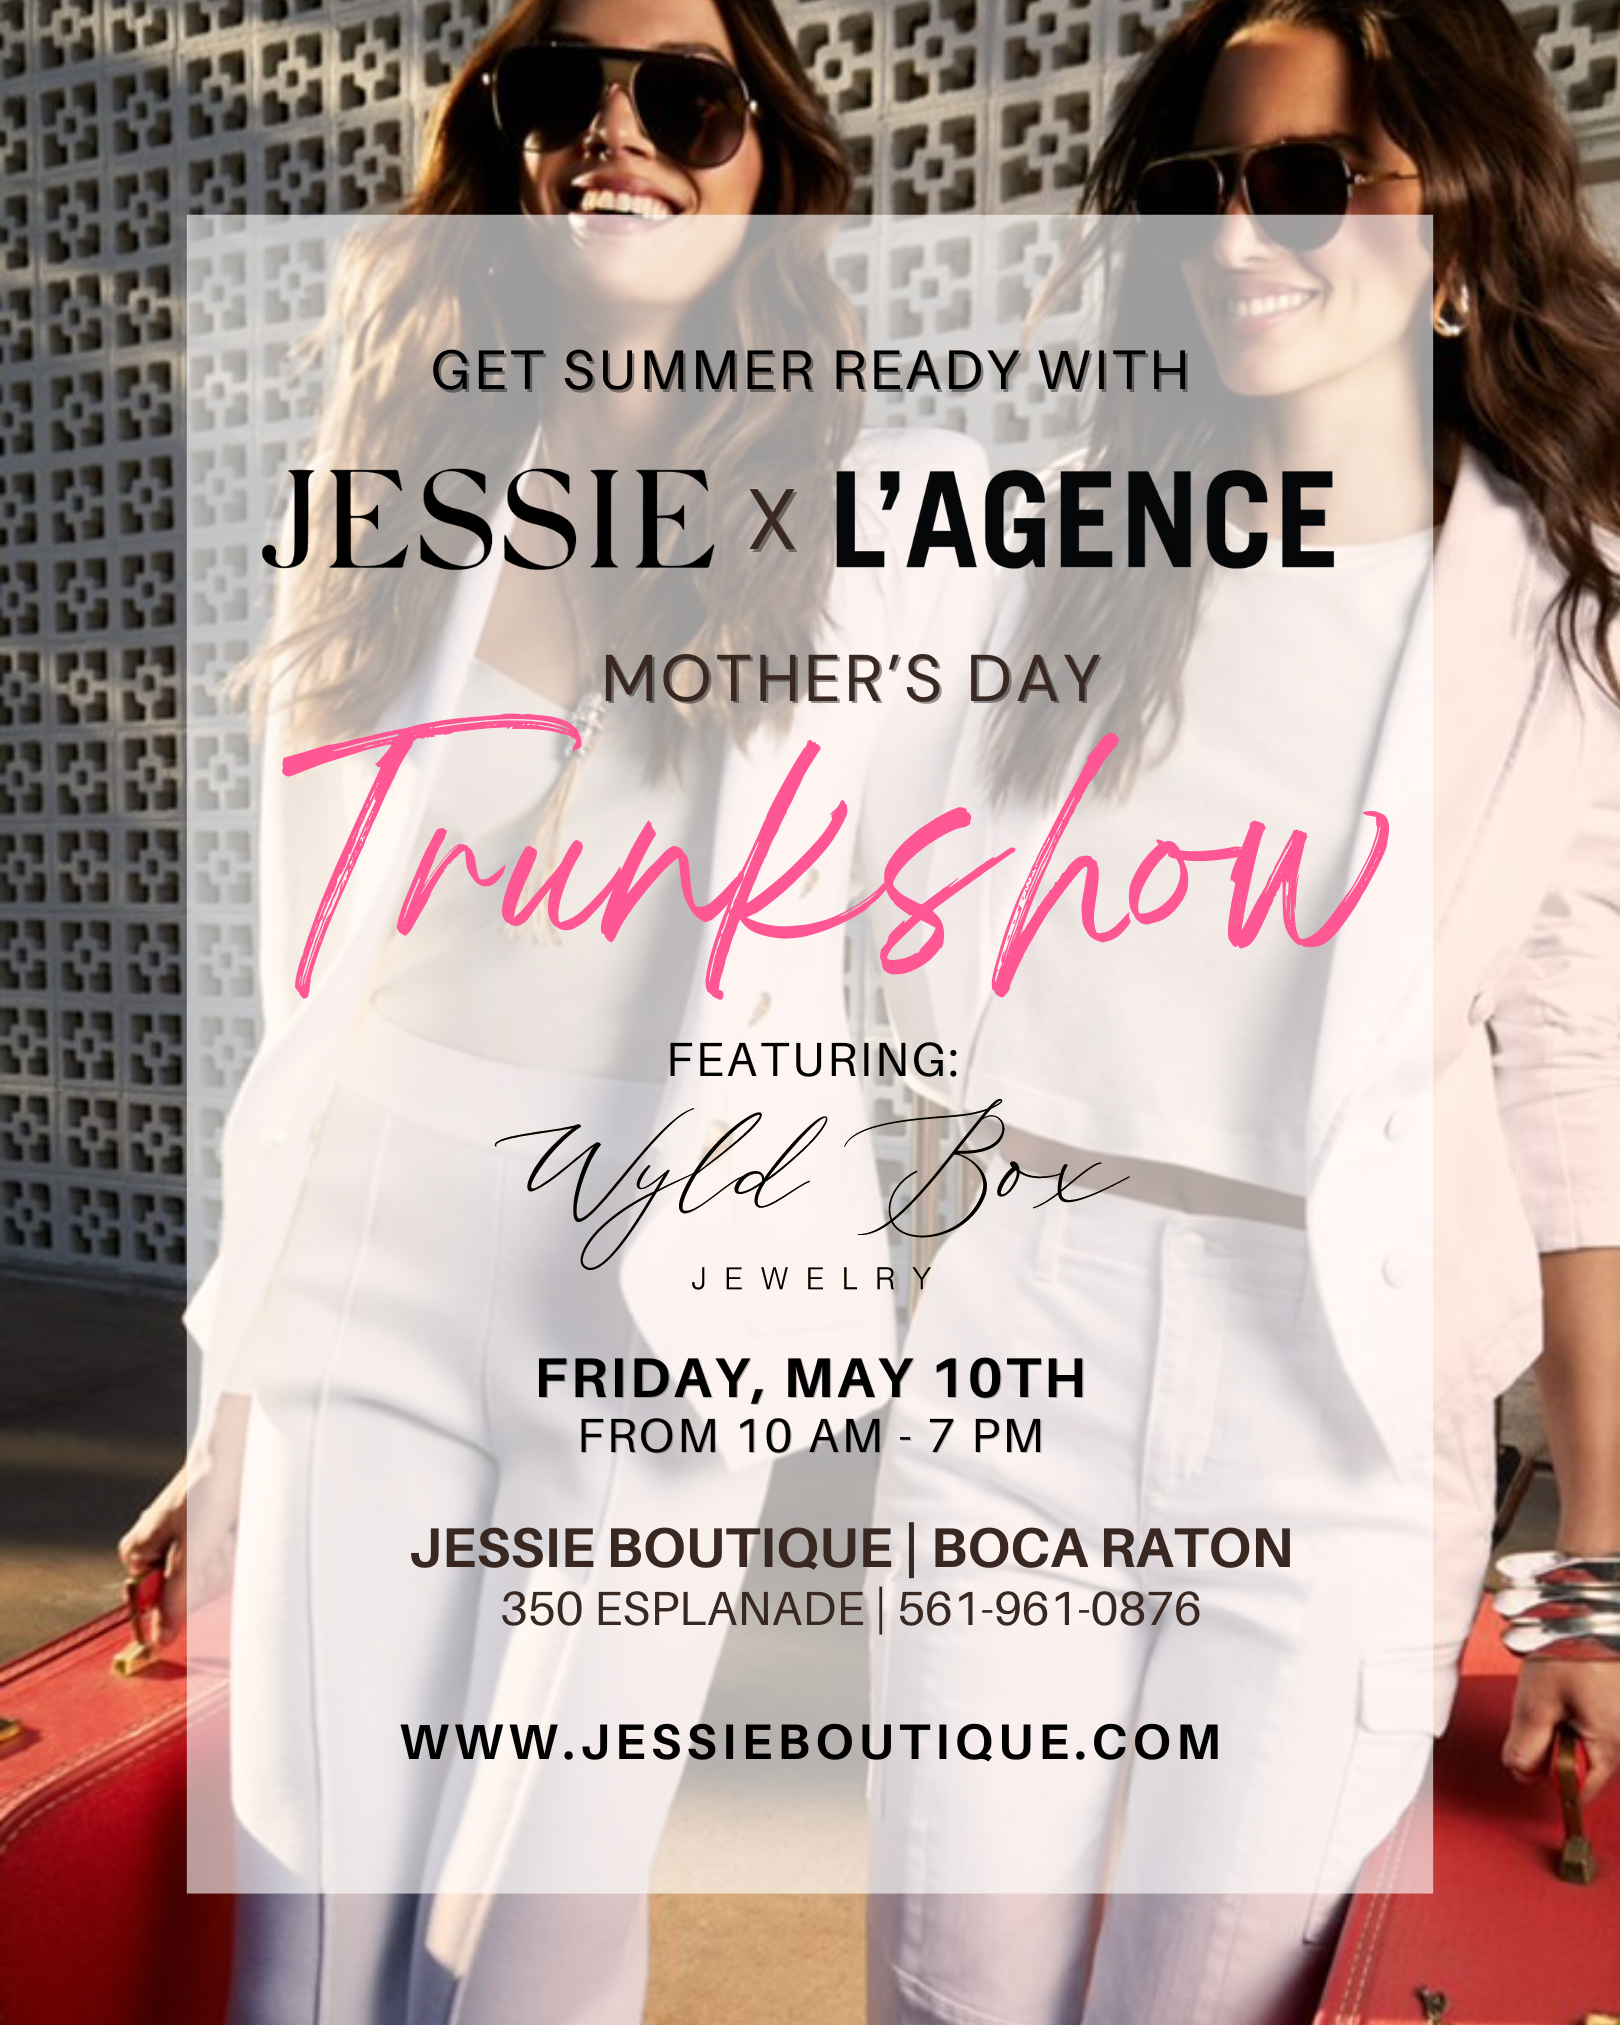 JESSIE X L'AGENCE Mother's Day TrunkShow feat. Wyld box Jewelry for Mother's Day